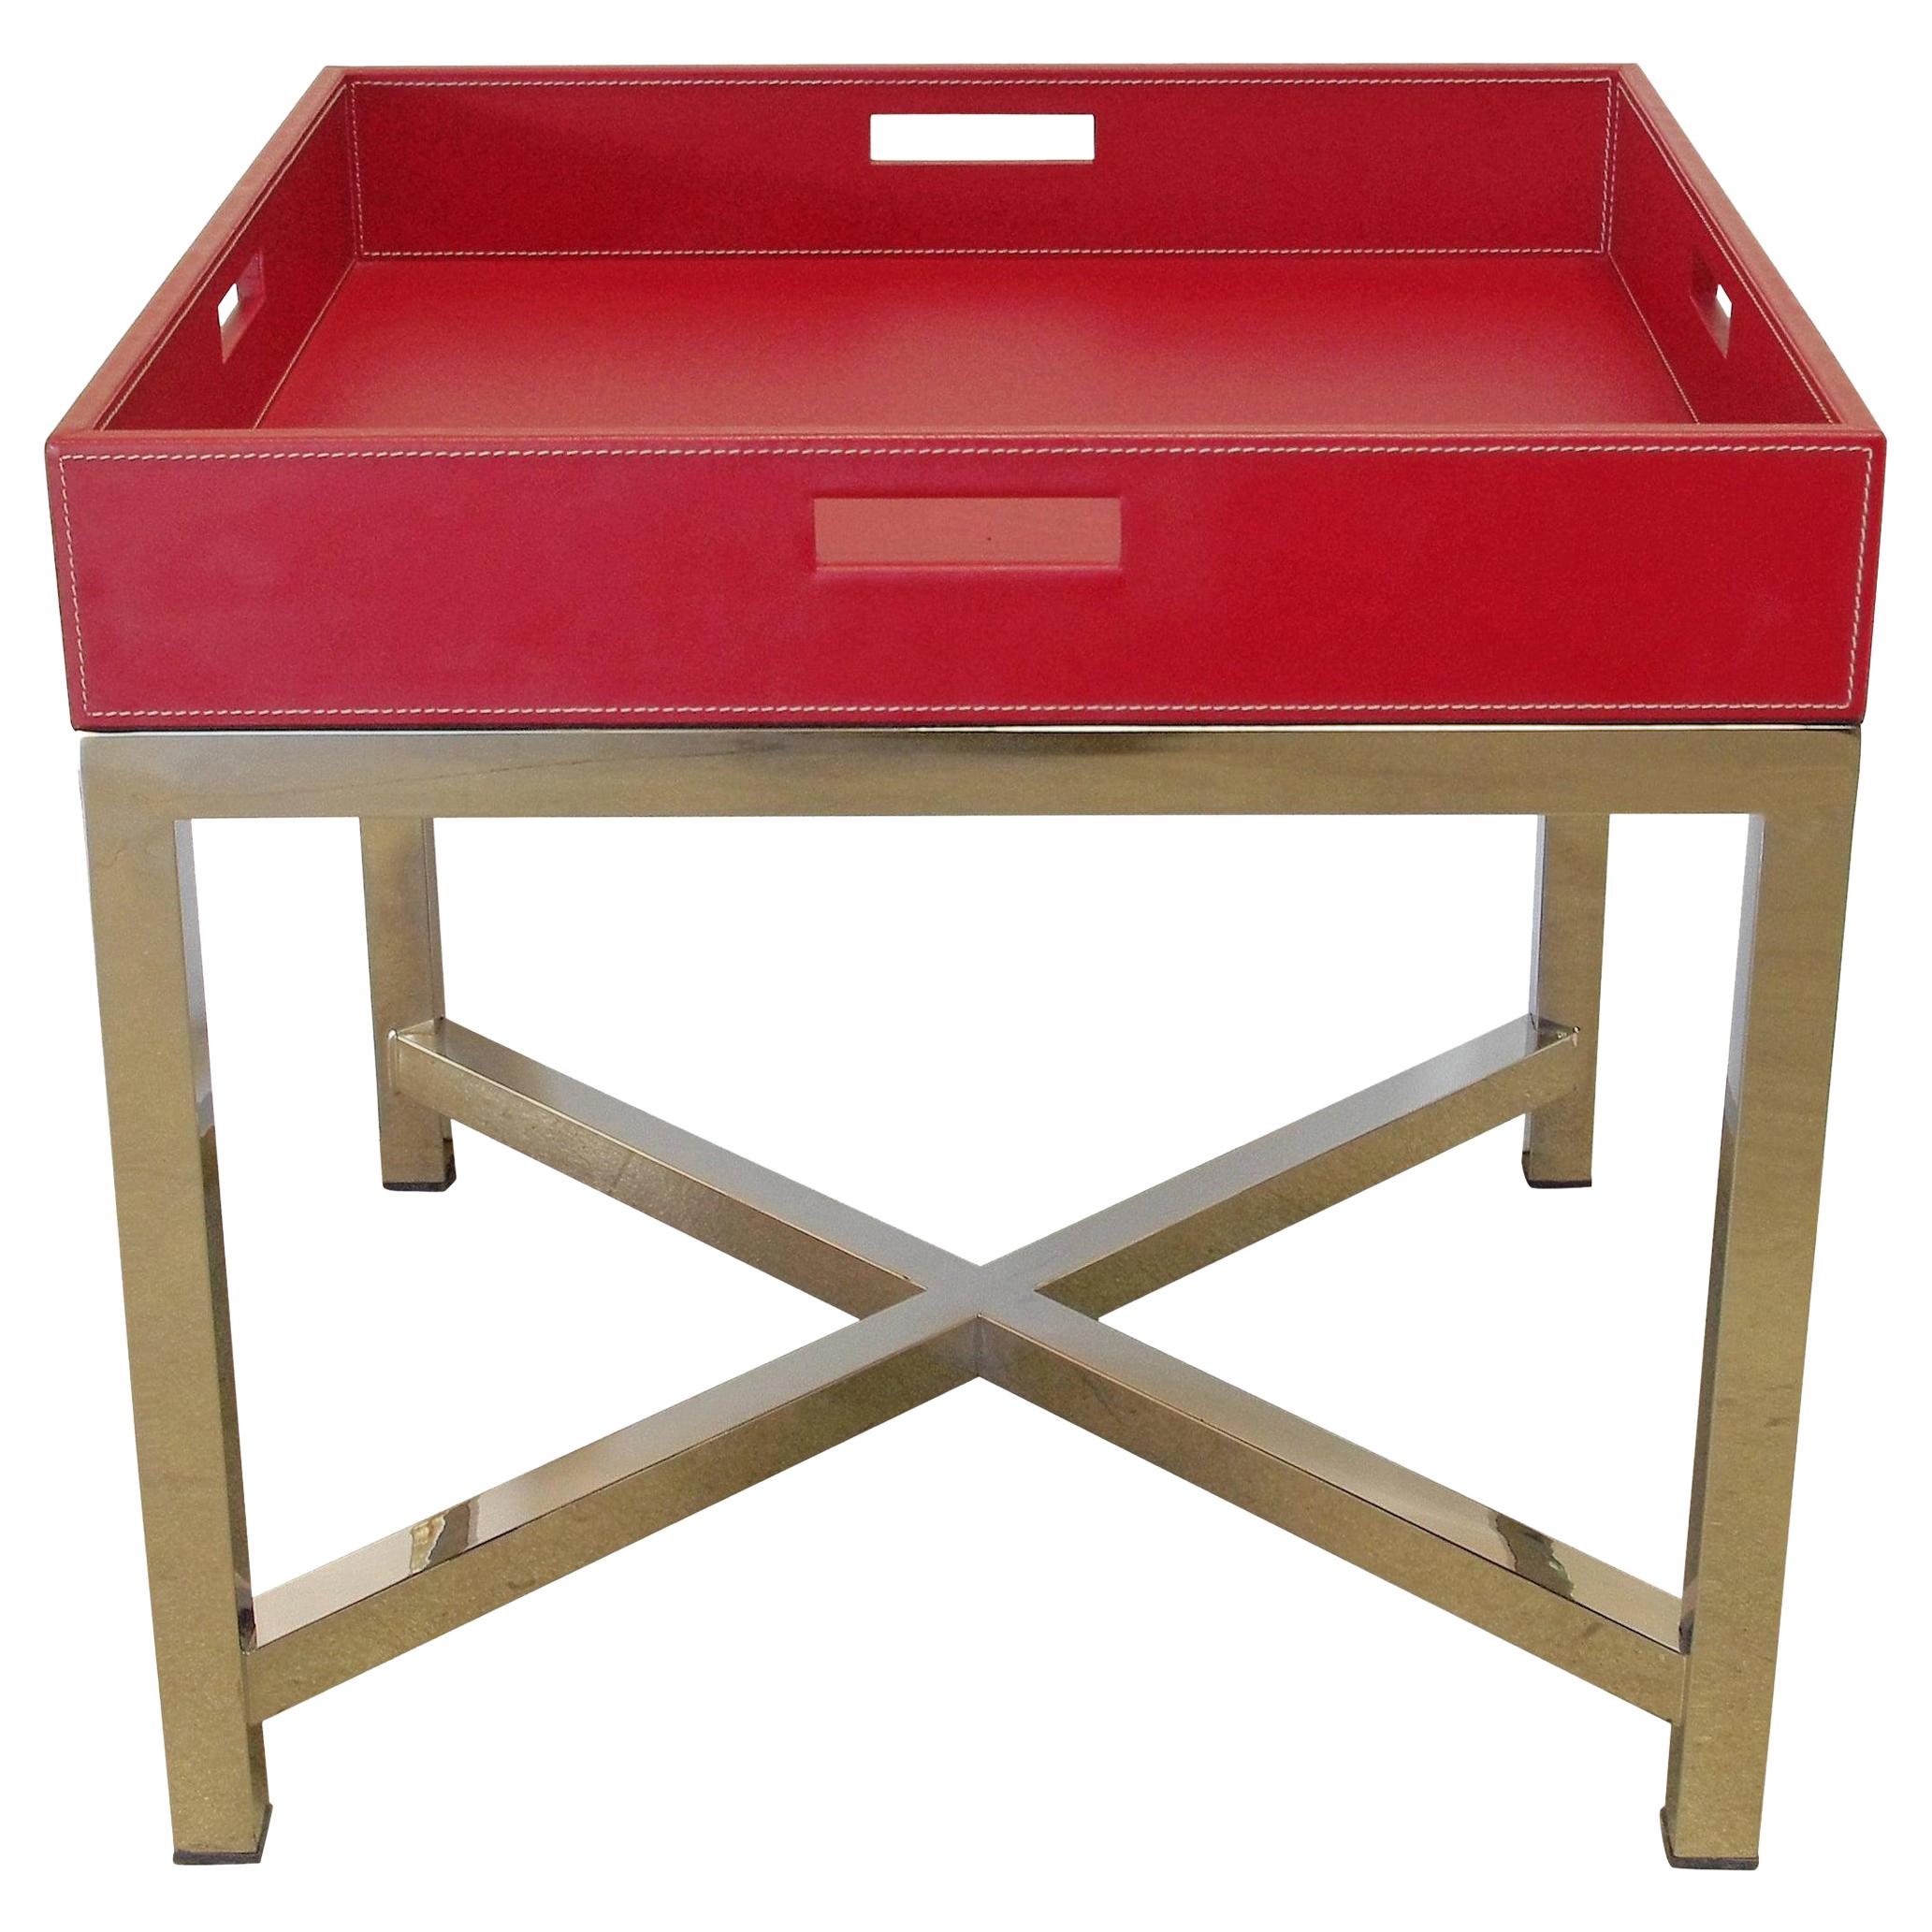 Red Leather and Stainless Steel Tray Table, Italy, 1980s For Sale